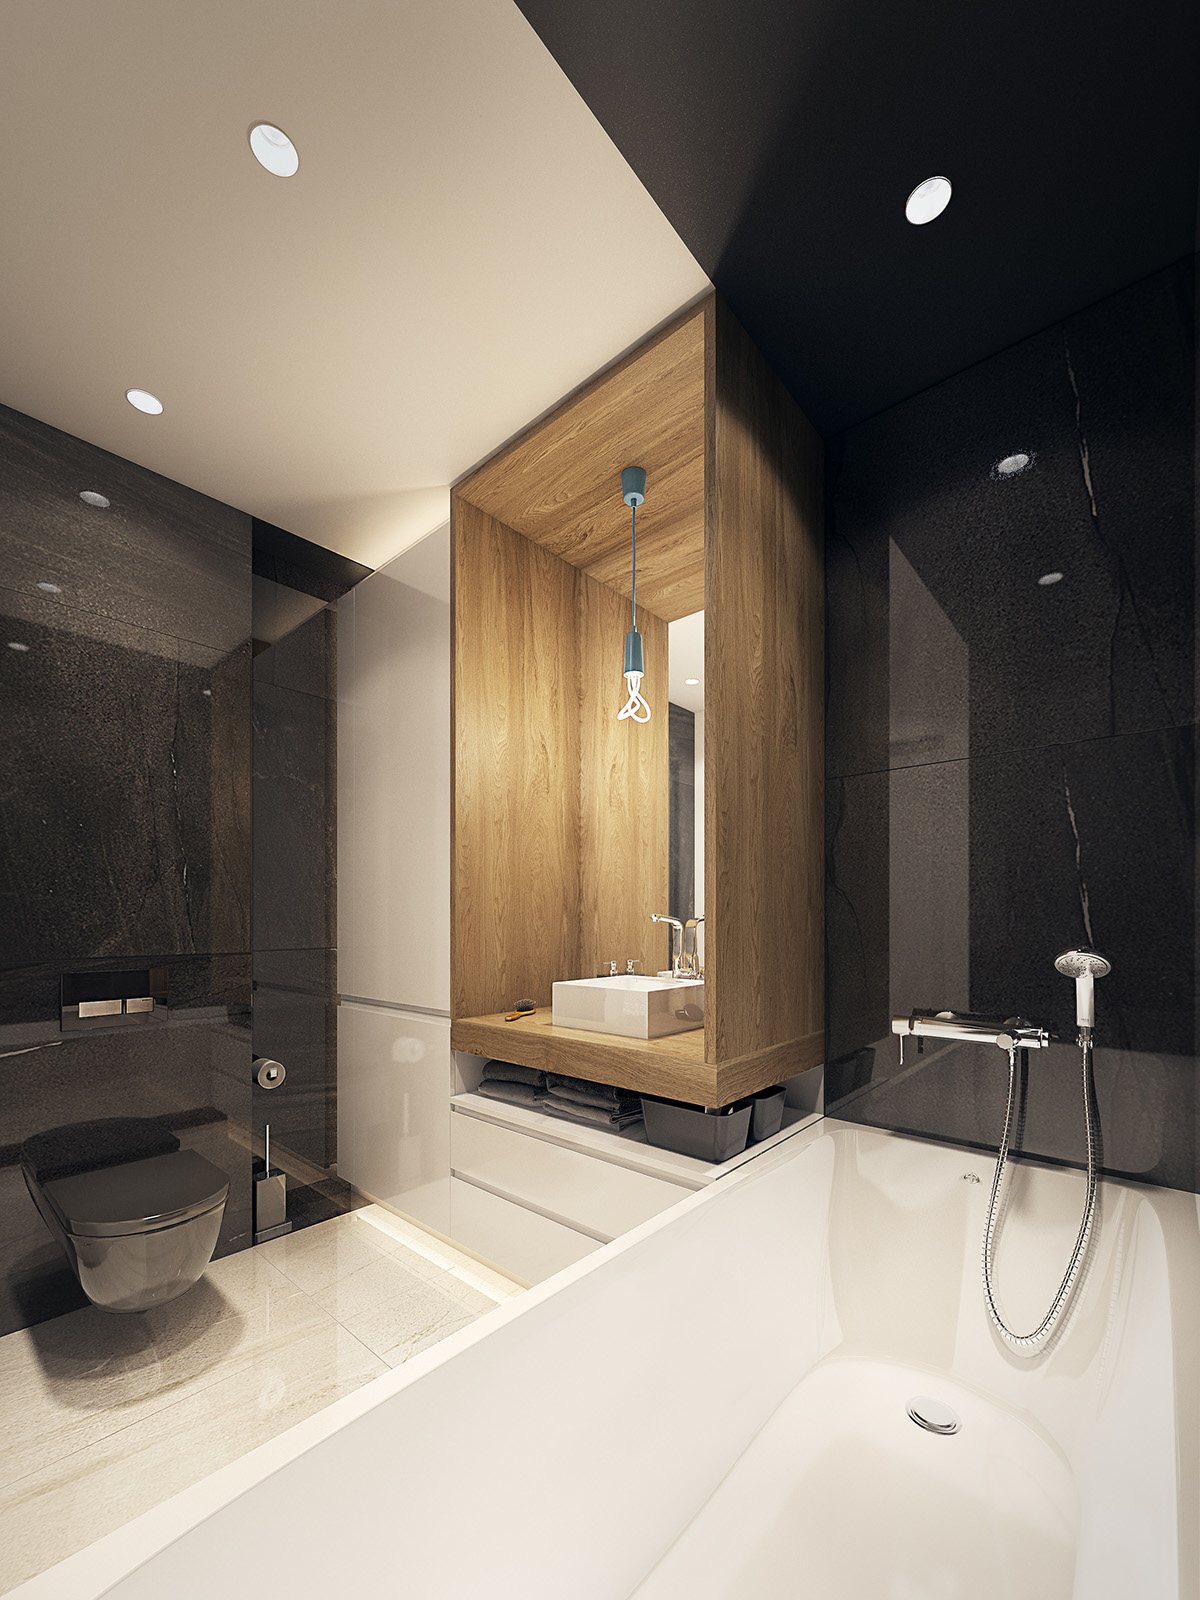 minimalist design idea for wooden bathrooms "width =" 1200 "height =" 1600 "srcset =" https://mileray.com/wp-content/uploads/2020/05/1588516234_408_Minimalist-Bathroom-Designs-Looks-So-Trendy-With-Backsplash-and-Wooden.jpg 1200w, https://mileray.com/ wp -content / uploads / 2016/09 / PLASTERLINA-225x300.jpg 225w, https://mileray.com/wp-content/uploads/2016/09/PLASTERLINA-768x1024.jpg 768w, https://mileray.com/ wp -content / uploads / 2016/09 / PLASTERLINA-696x928.jpg 696w, https://mileray.com/wp-content/uploads/2016/09/PLASTERLINA-1068x1424.jpg 1068w, https://mileray.com/ wp -content / uploads / 2016/09 / PLASTERLINA-315x420.jpg 315w "Sizes =" (maximum width: 1200px) 100vw, 1200px